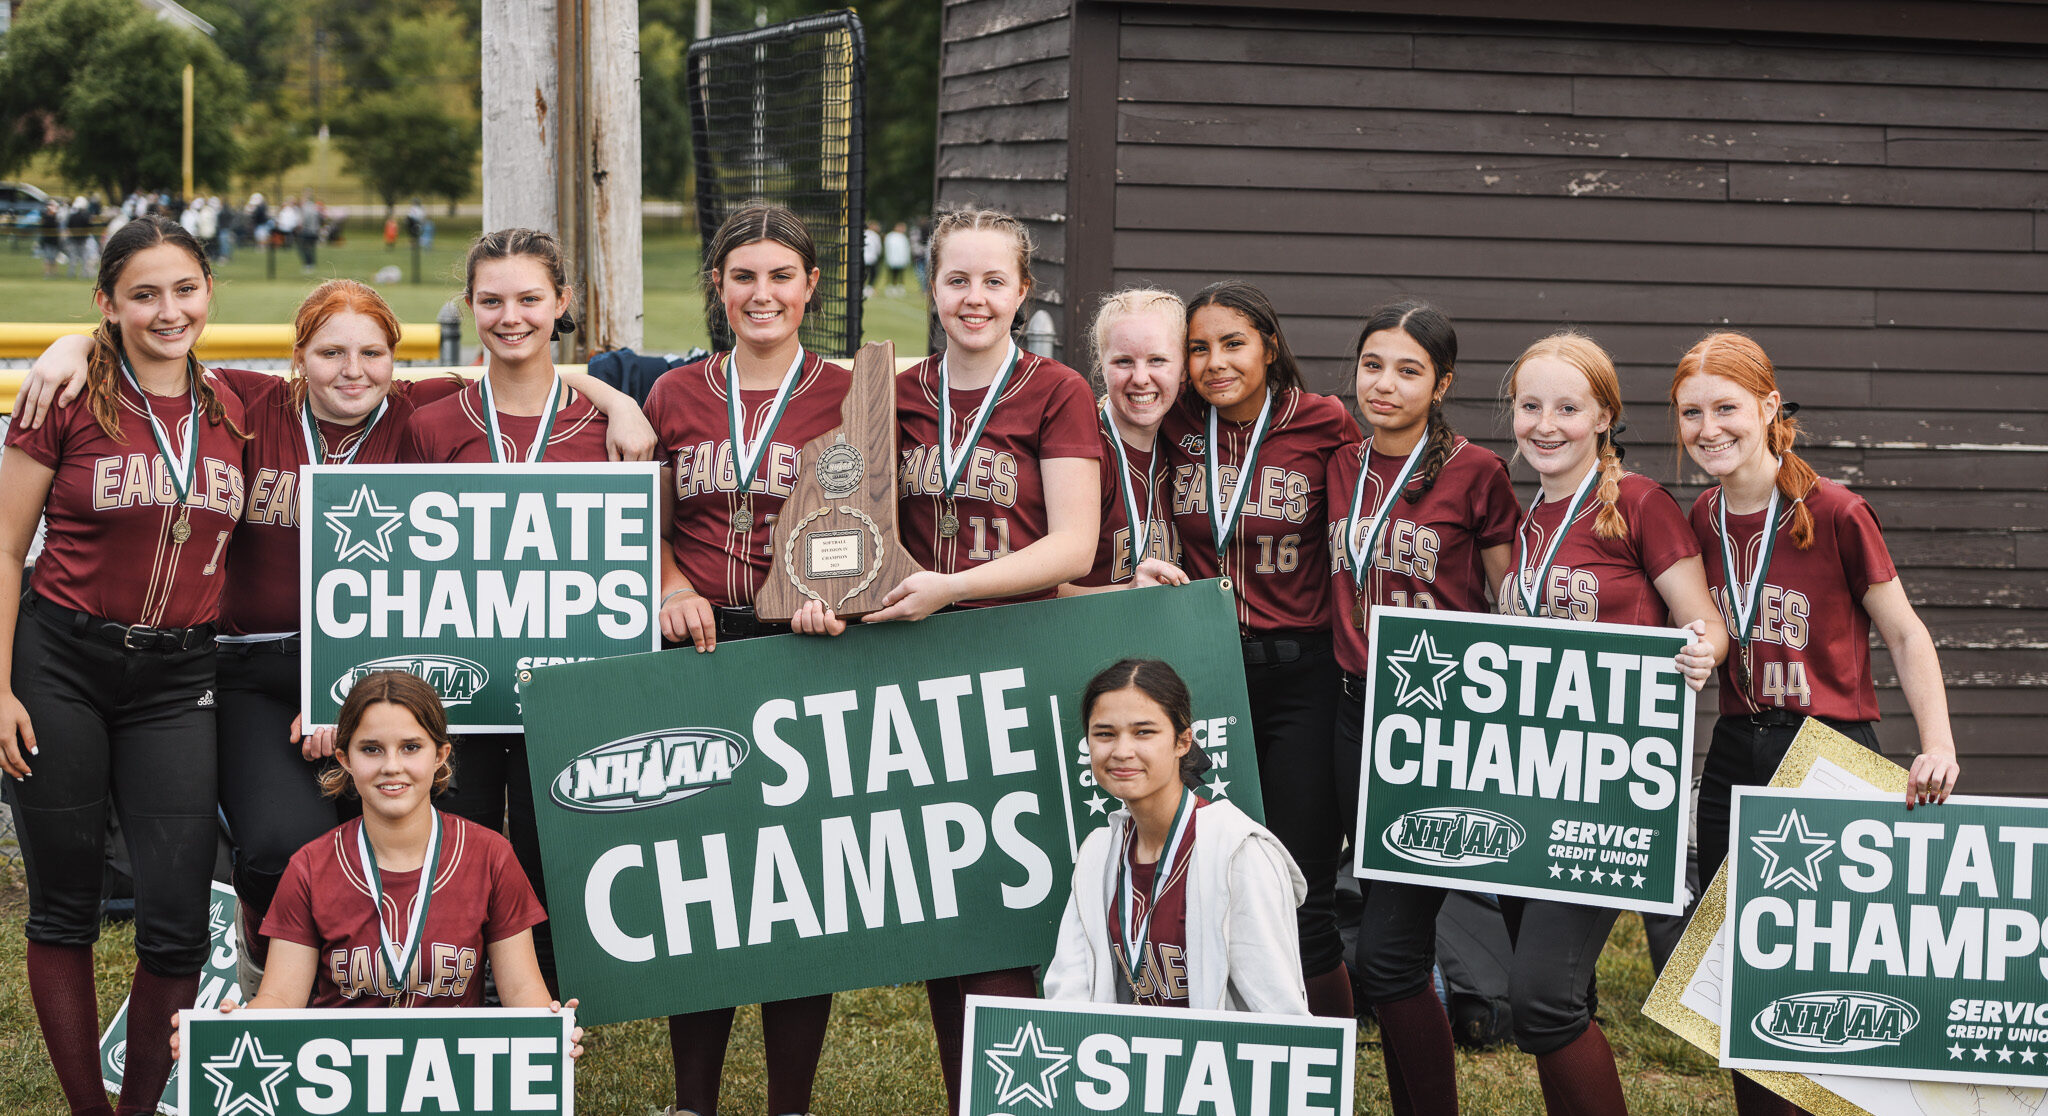 A group of softball players posing with their state championships.